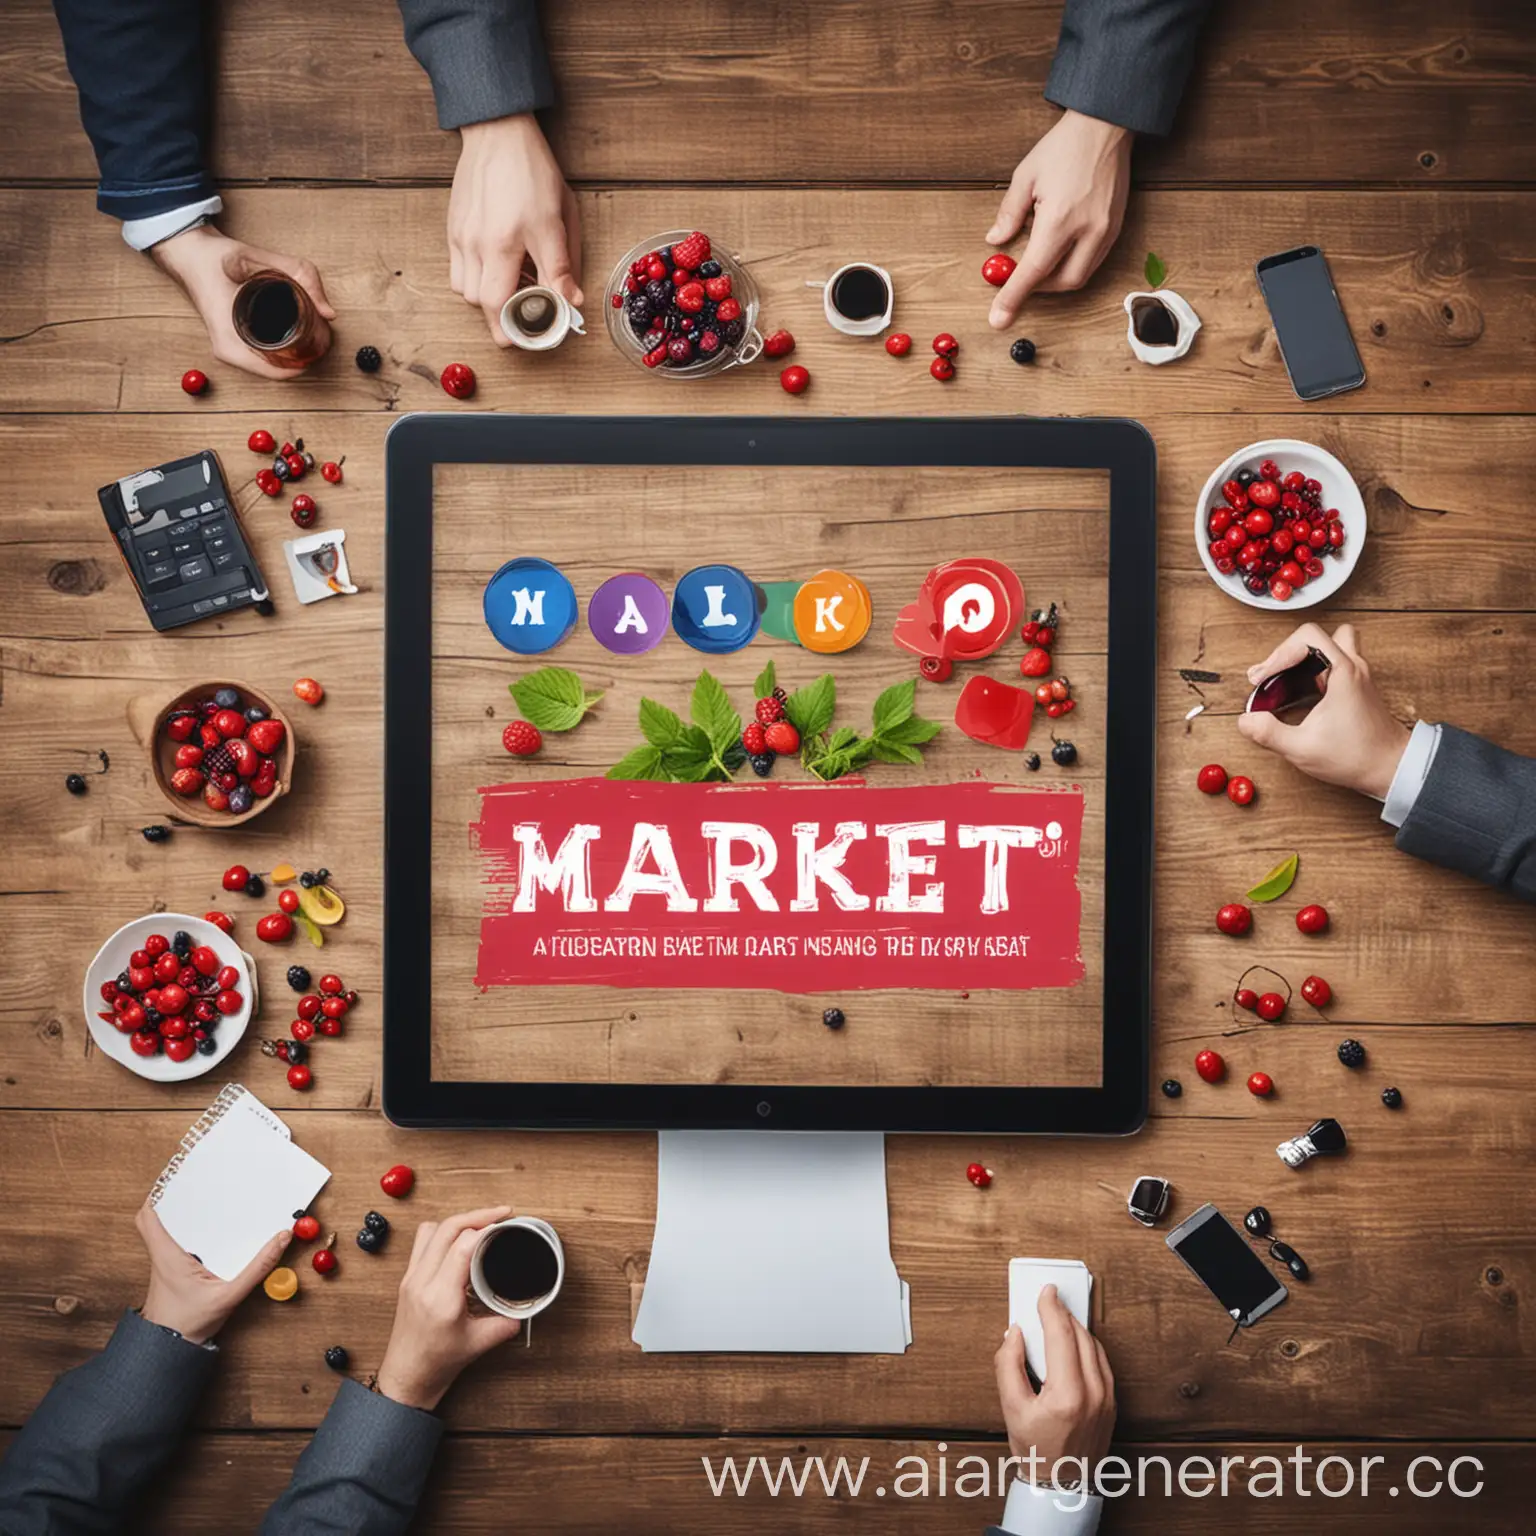 Promotion on marketplaces is our expertise. Our team knows how to sell on platforms like Ozon, Wildberries, Beru, and Yandex.Market. We will develop a strategy that will help you increase sales and earn more money.